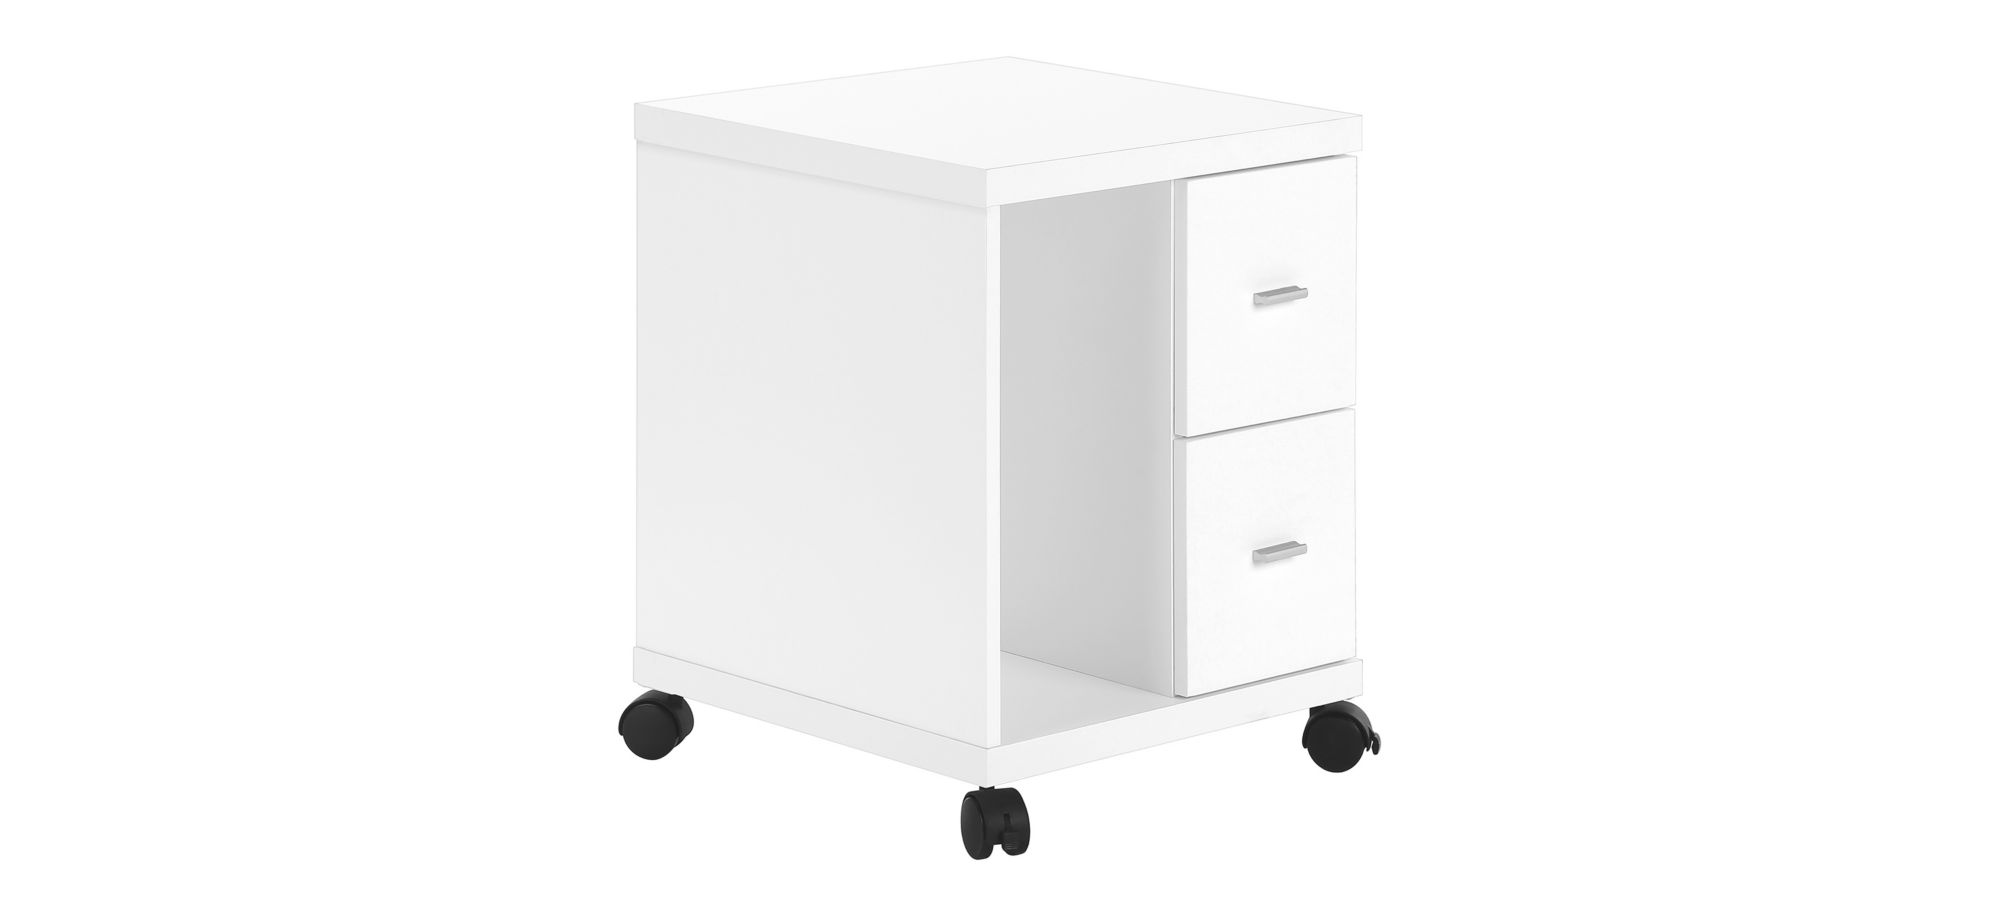 Monarch 23" Office Cabinet in White by Monarch Specialties